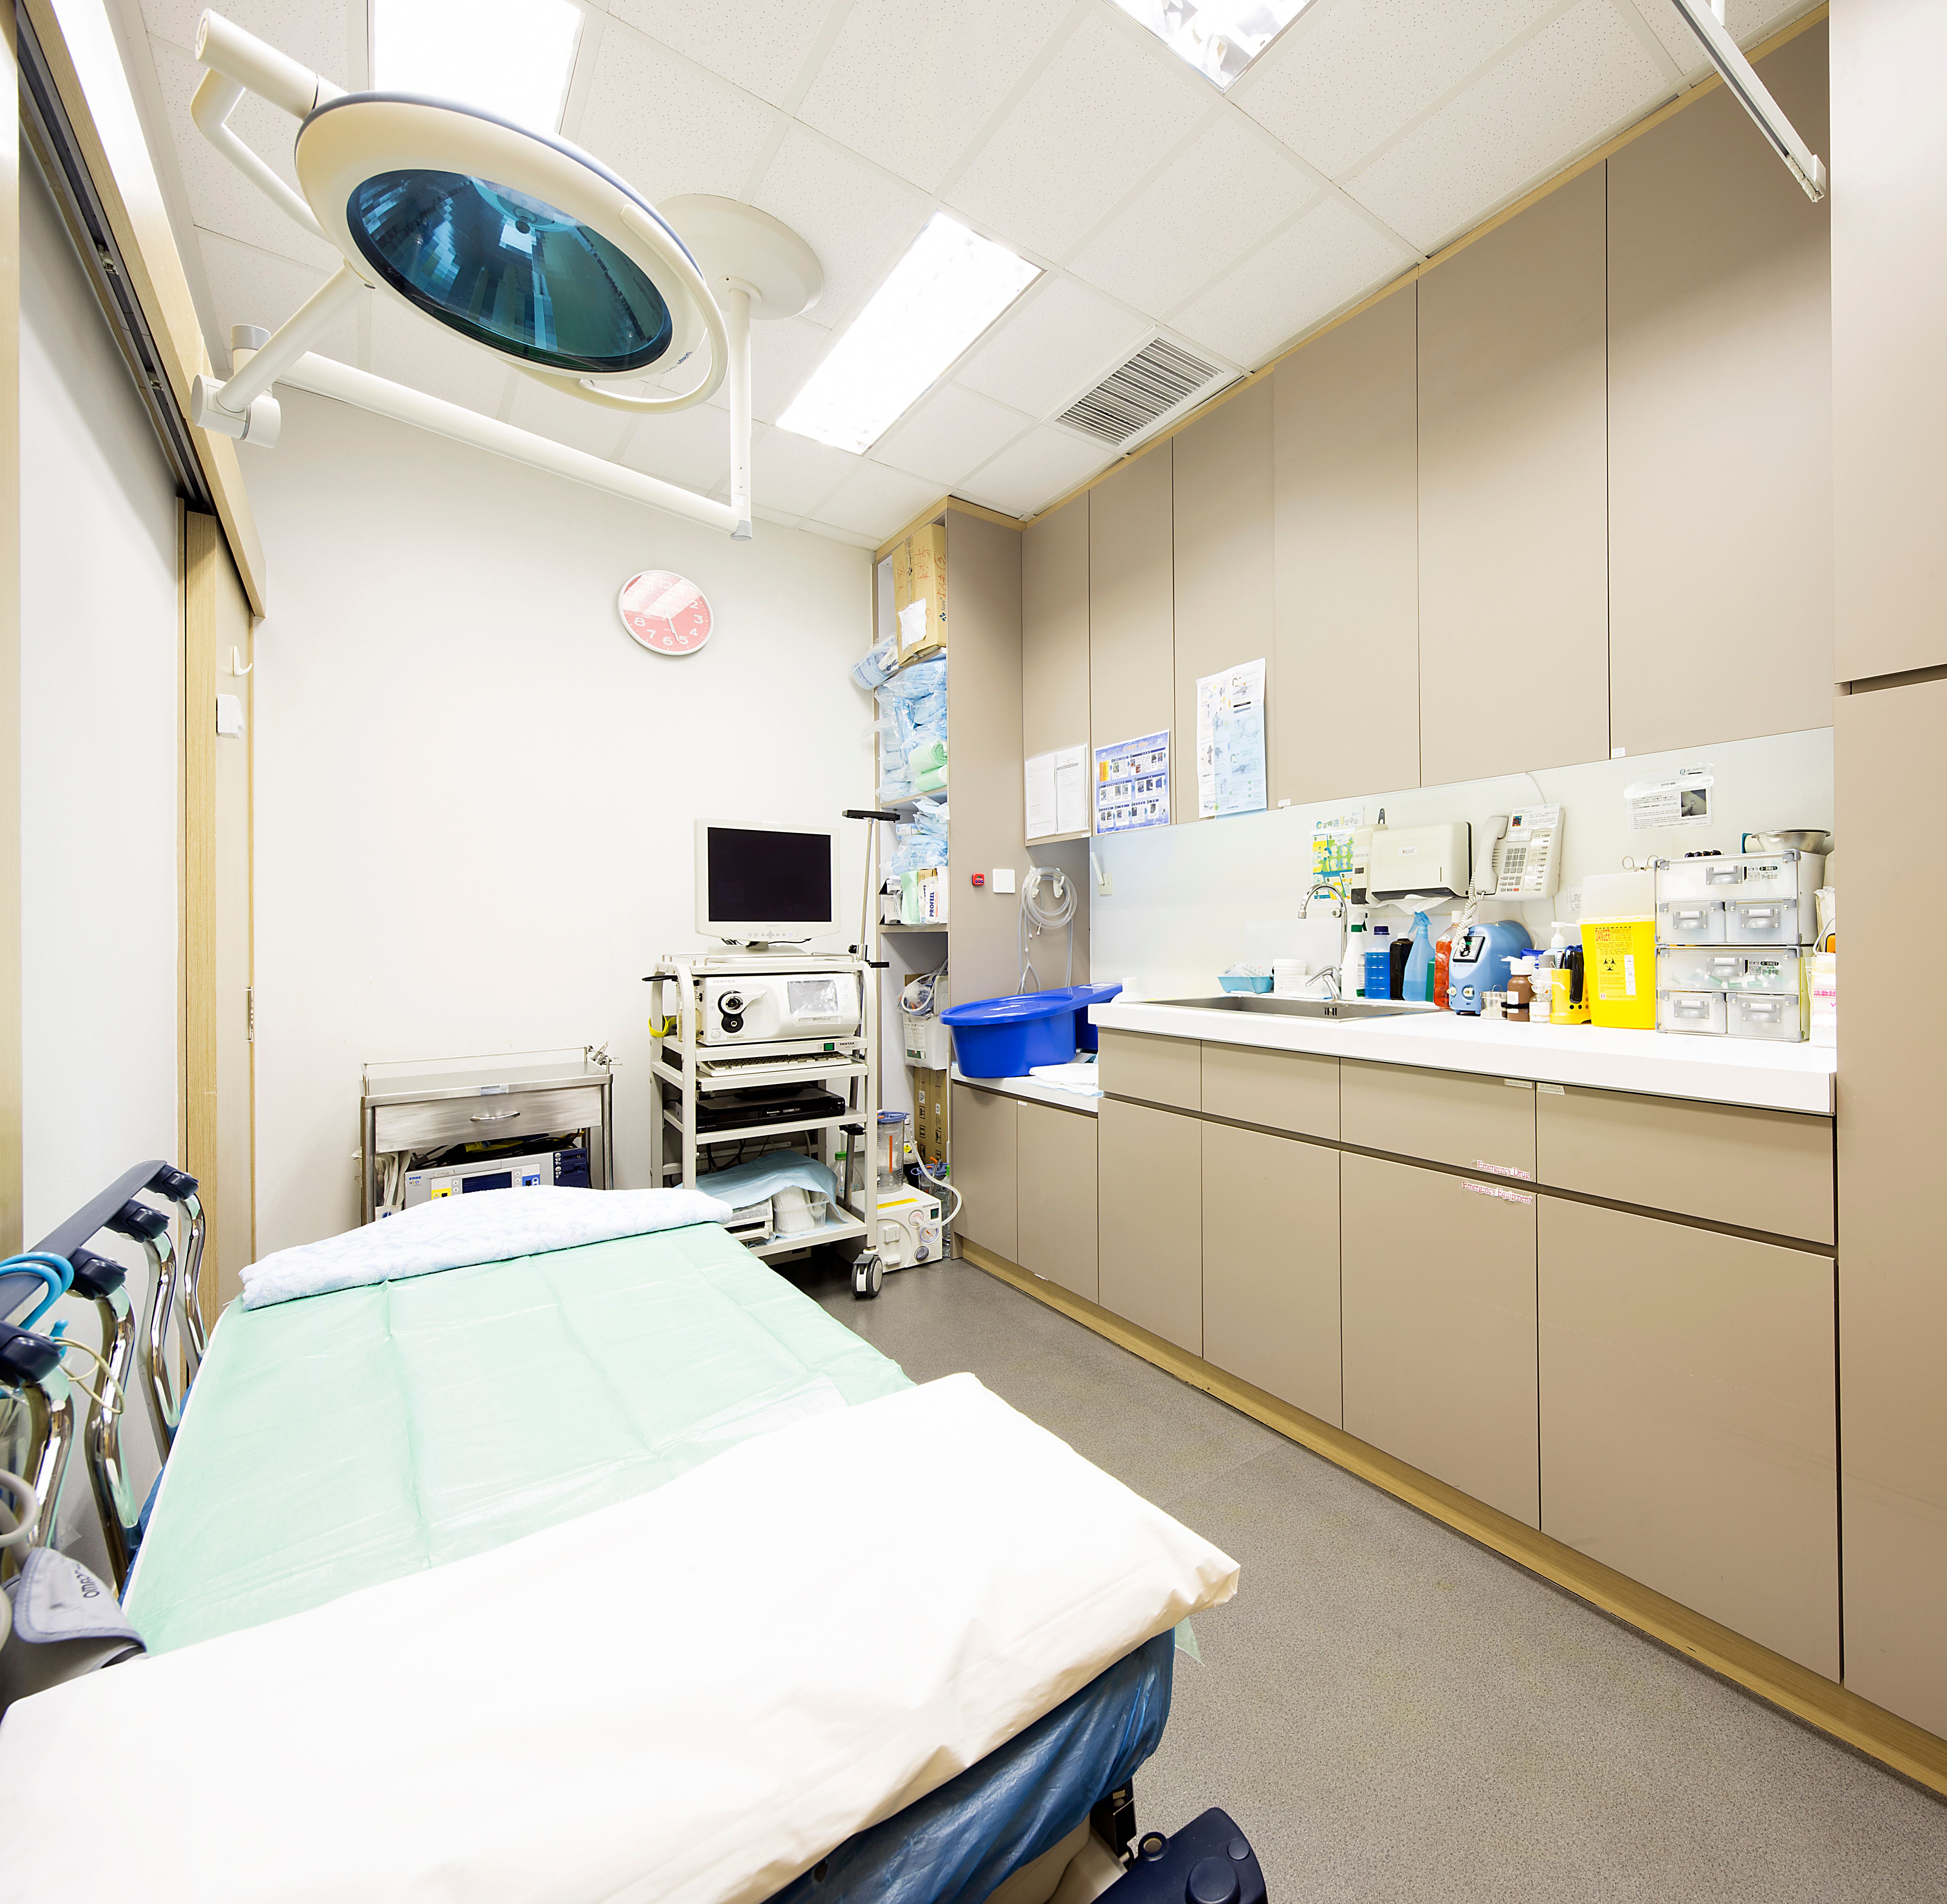 Examination room with patient bed, medical equipment and cabinets